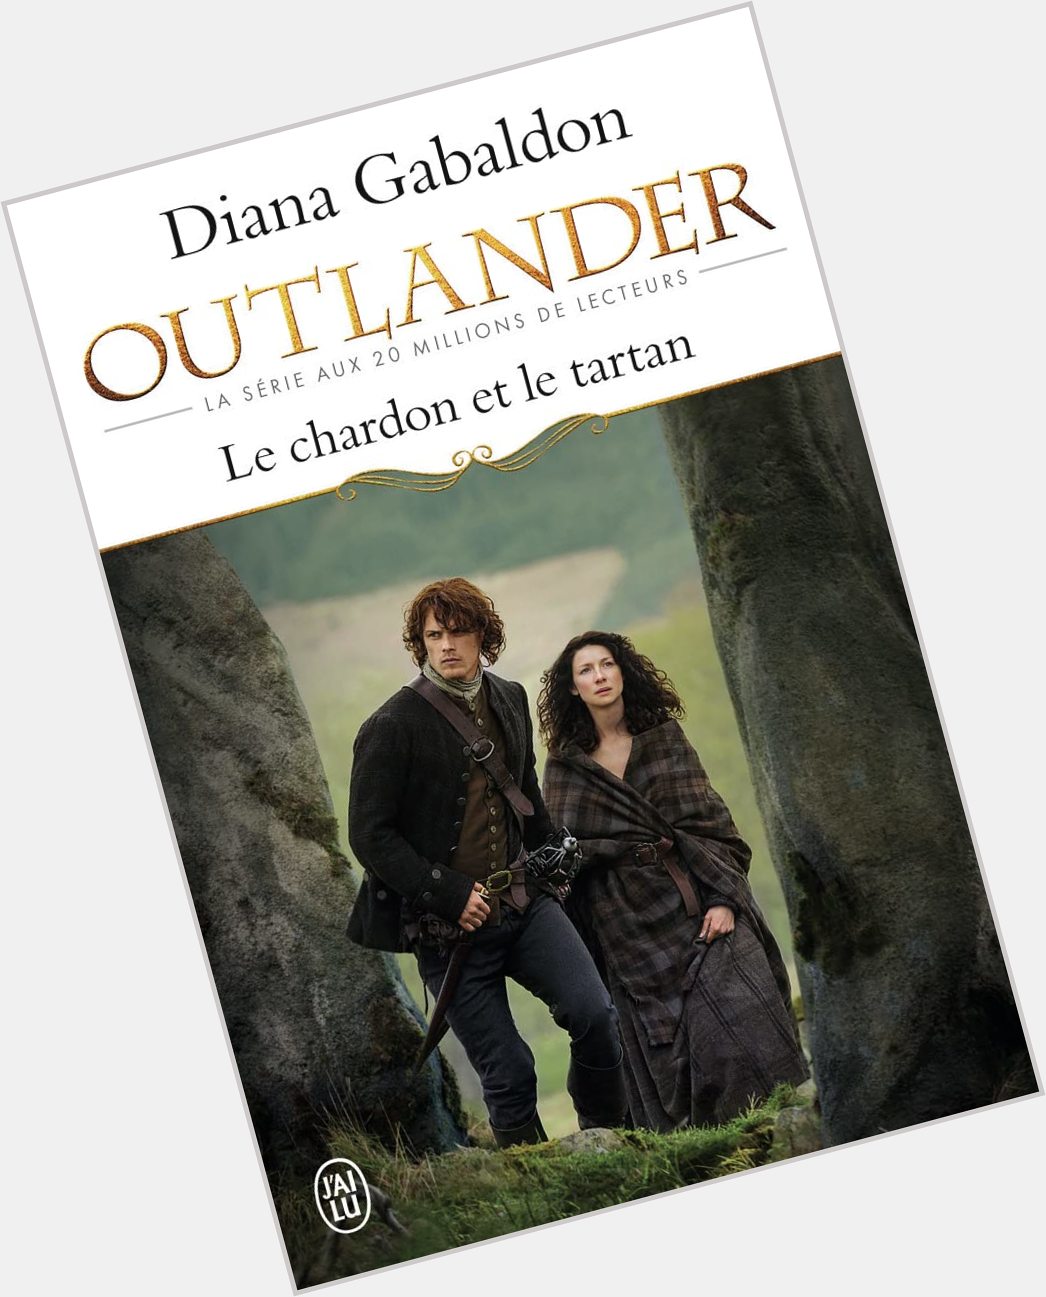  Happy birthday to Diana Gabaldon     Thank you Diana for making me dream with the Outlander series 